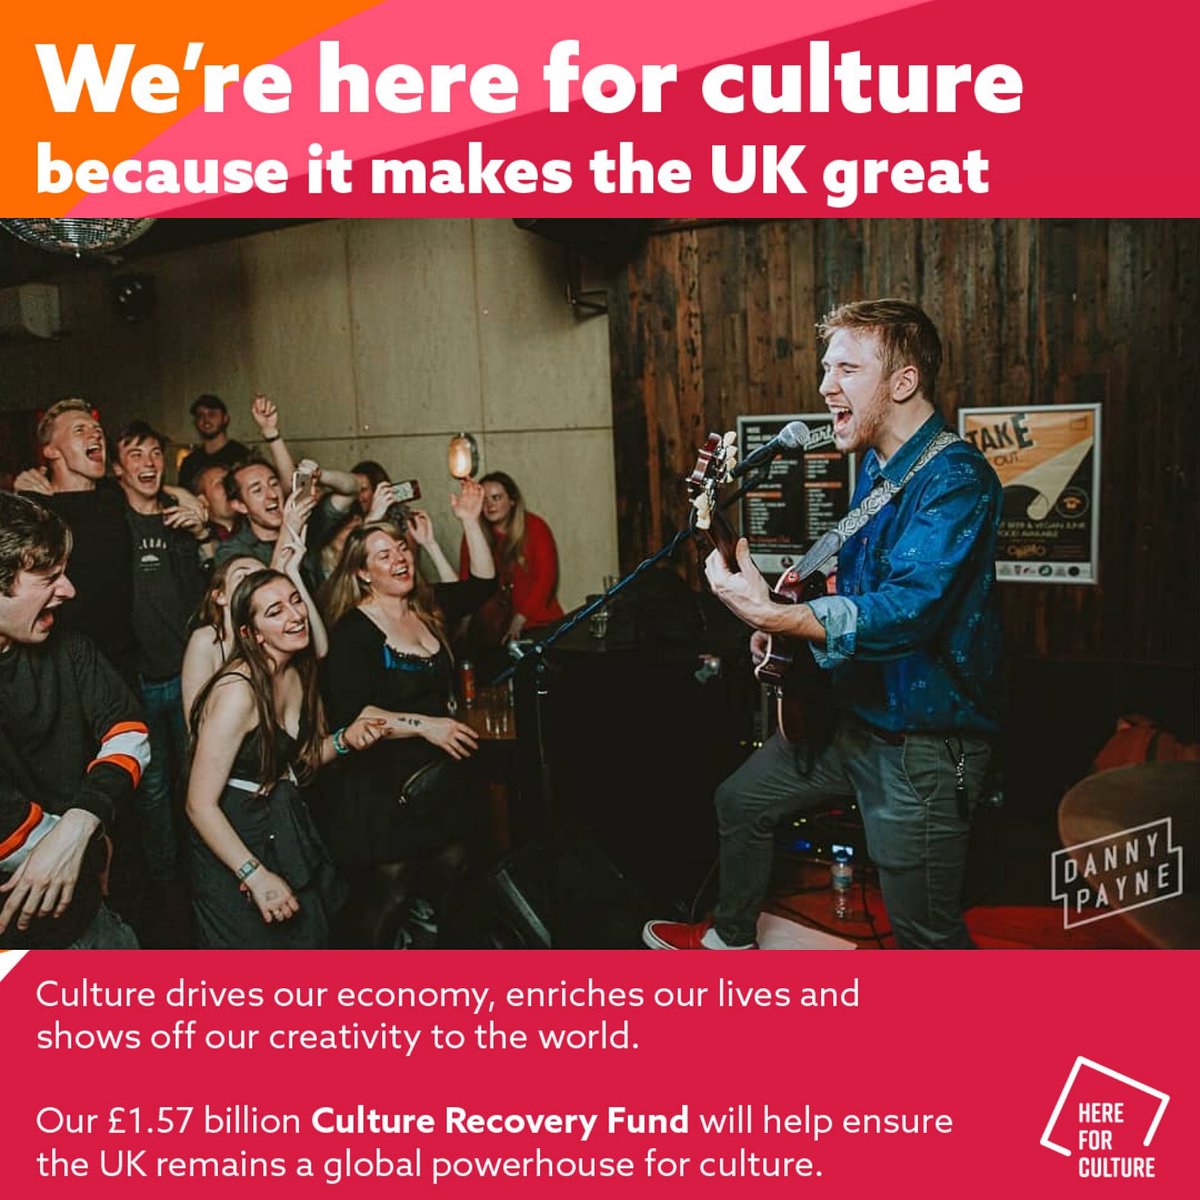 Over the moon to announce we've been granted funds via @DCMS #CulturalRecoveryFund to help us survive the next months. Also, importantly, to bring back live music 🎶

We will support local artists, event workers & keep doing our bit to enrich lives ❤️

Oporto is #hereforculture